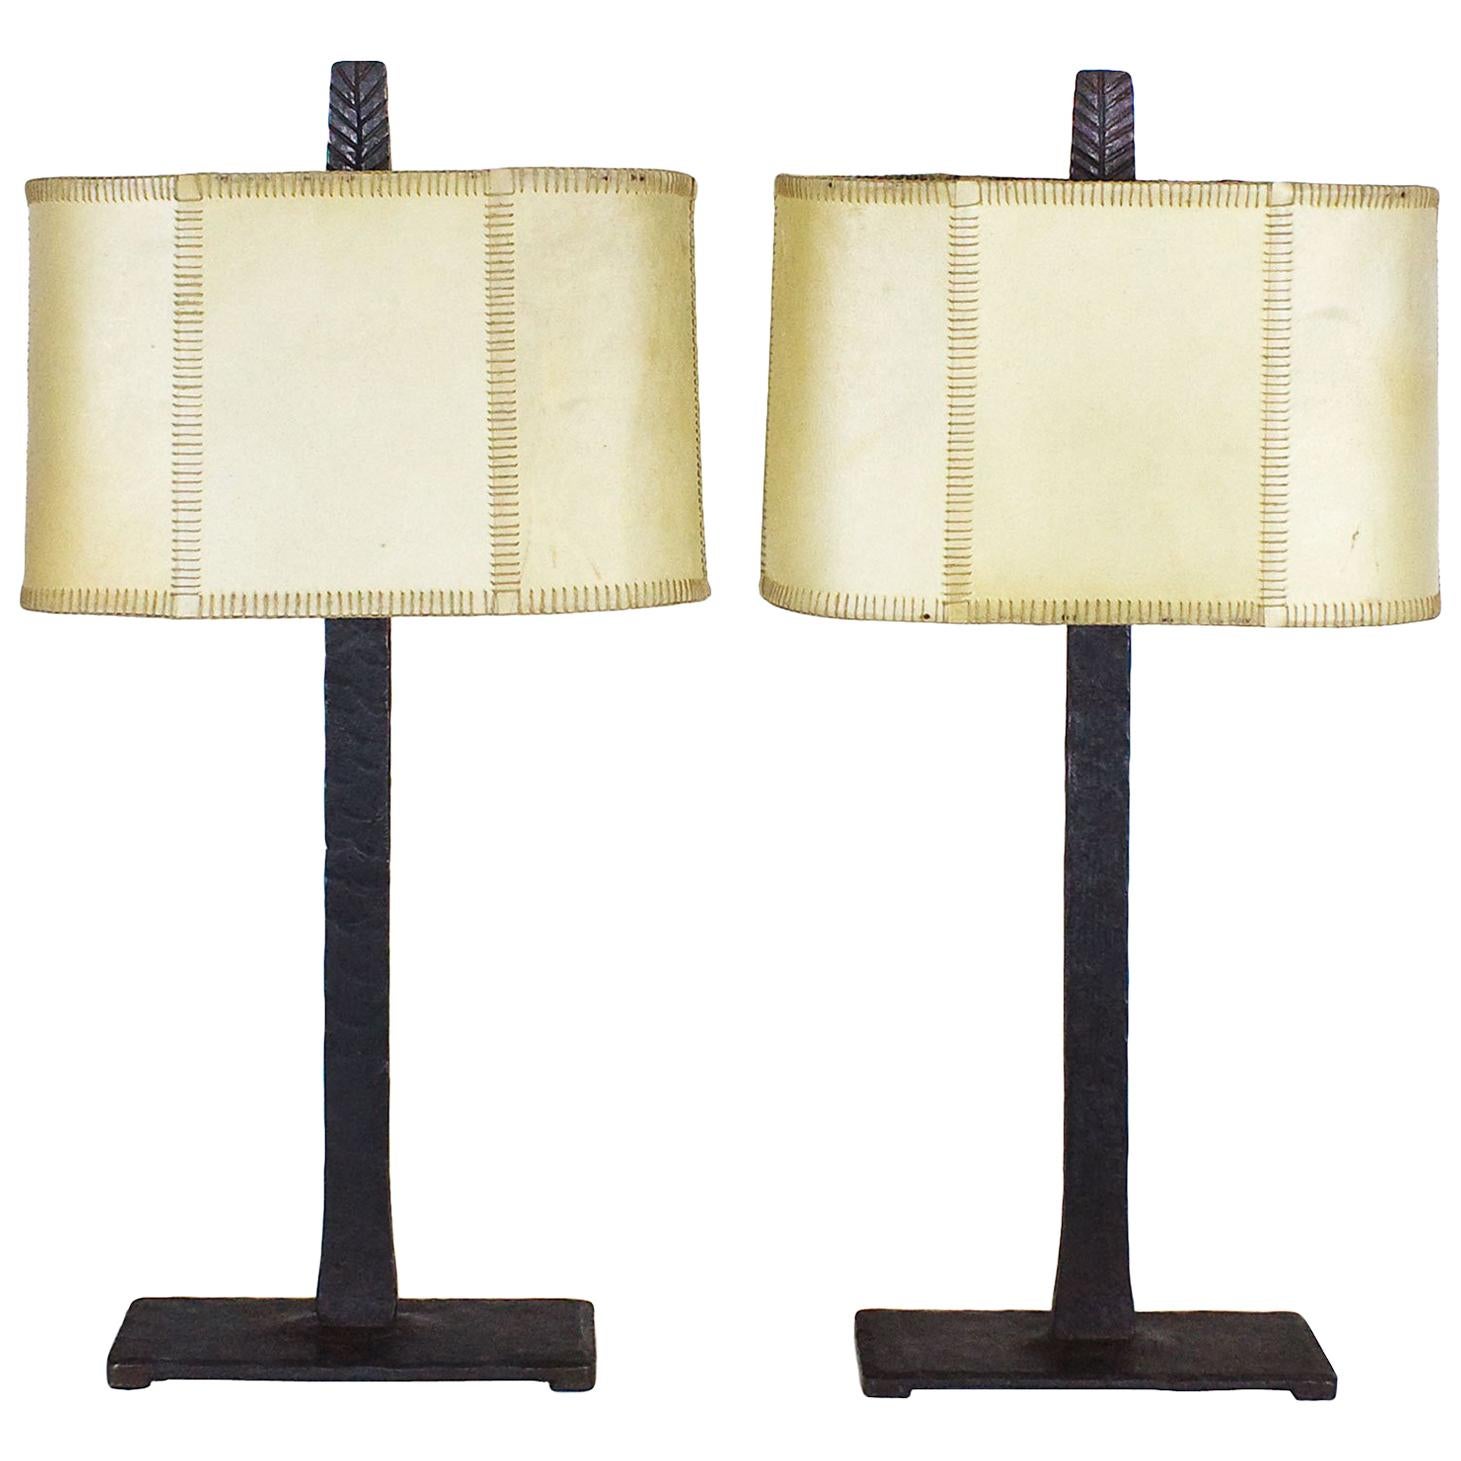 1950s Pair of Table Lamps, Wrought Iron, Parchment, Barcelona